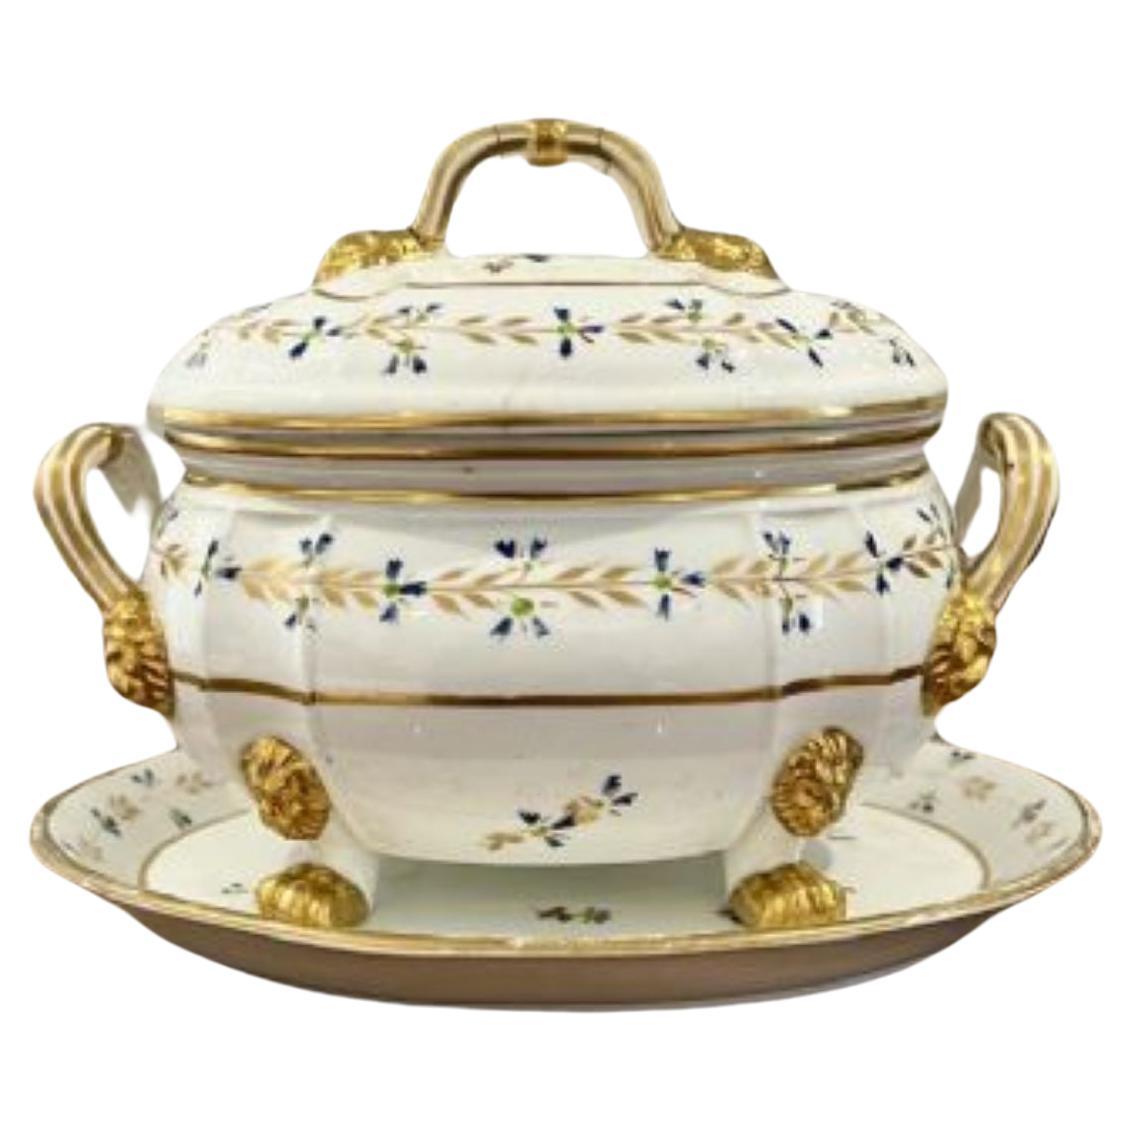 Outstanding quality early 19th century crown derby tureen and cover For Sale